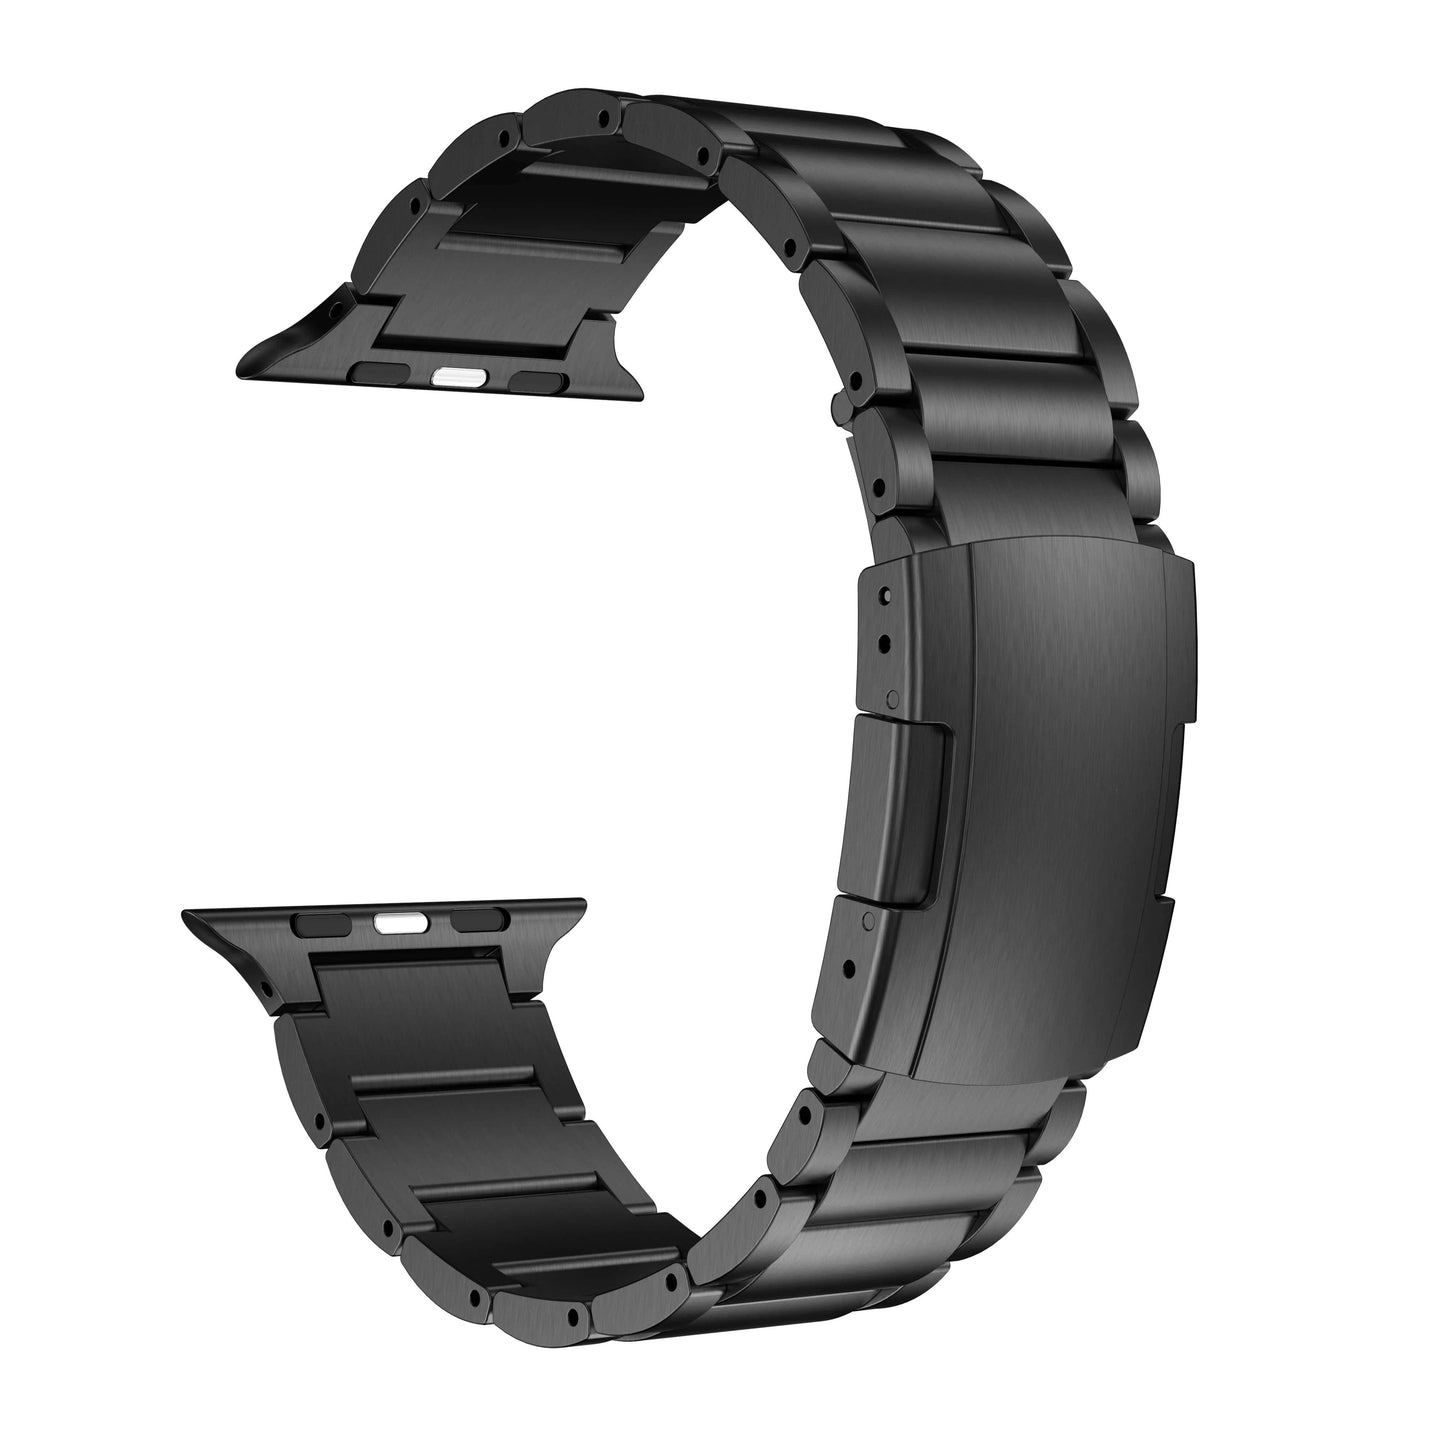 Titanium Apple Watch Band Matte Black Separated From Apple Watch